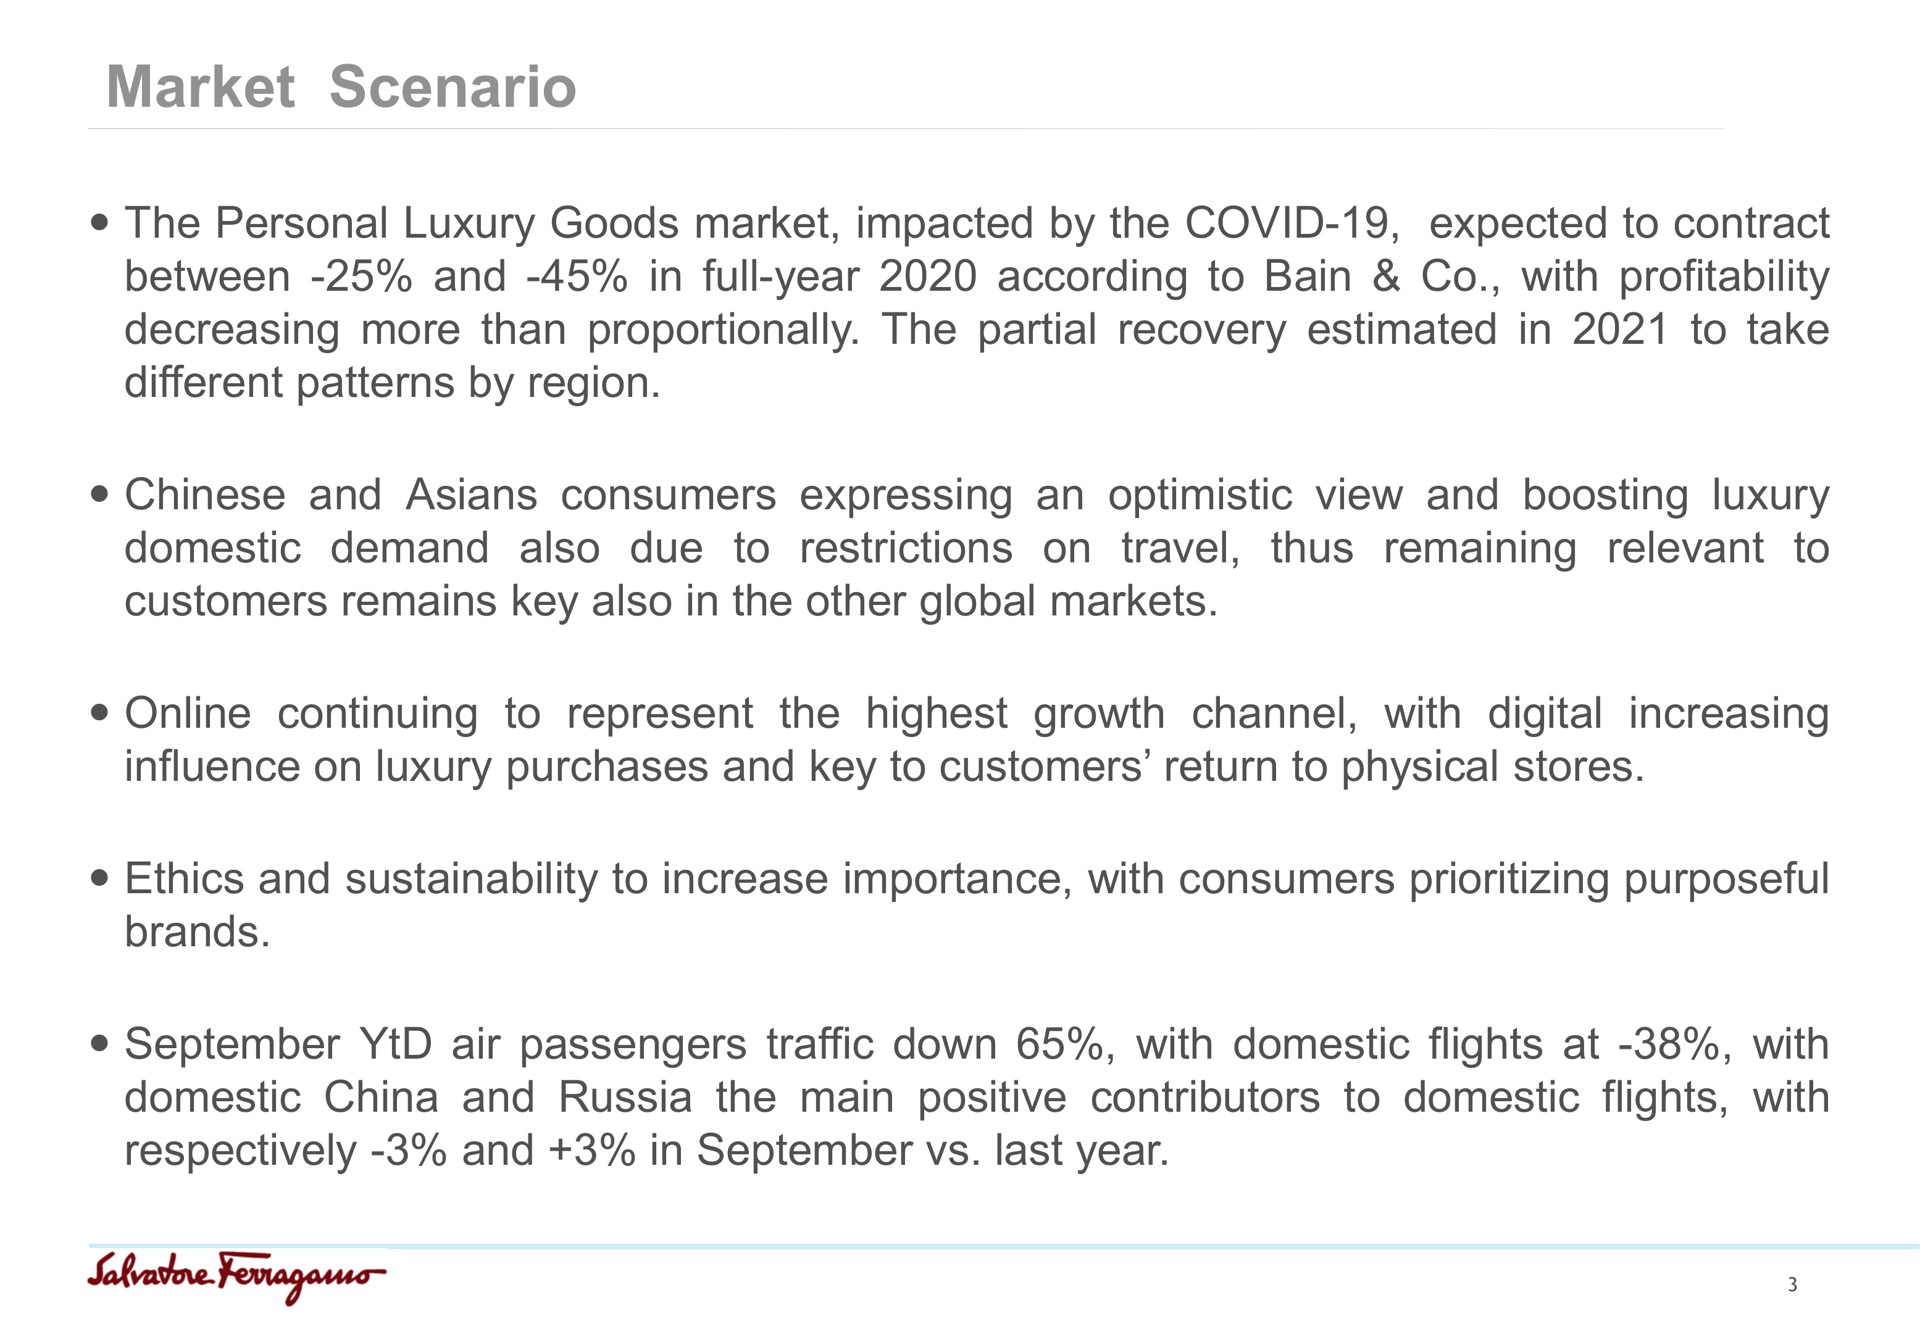 market scenario the personal luxury goods market impacted by the covid expected to contract between and in full year according to bain with profitability decreasing more than proportionally the partial recovery estimated in to take different patterns by region and consumers expressing an optimistic view and boosting luxury to thus remaining relevant domestic demand also due to restrictions on travel customers remains key also in the other global markets continuing to represent the highest growth channel with digital increasing influence on luxury purchases and key to customers return to physical stores ethics and to increase importance with consumers purposeful brands air passengers traffic down with domestic flights at with domestic china and russia the main positive contributors to domestic flights with respectively and in last year | Salvatore Ferragamo